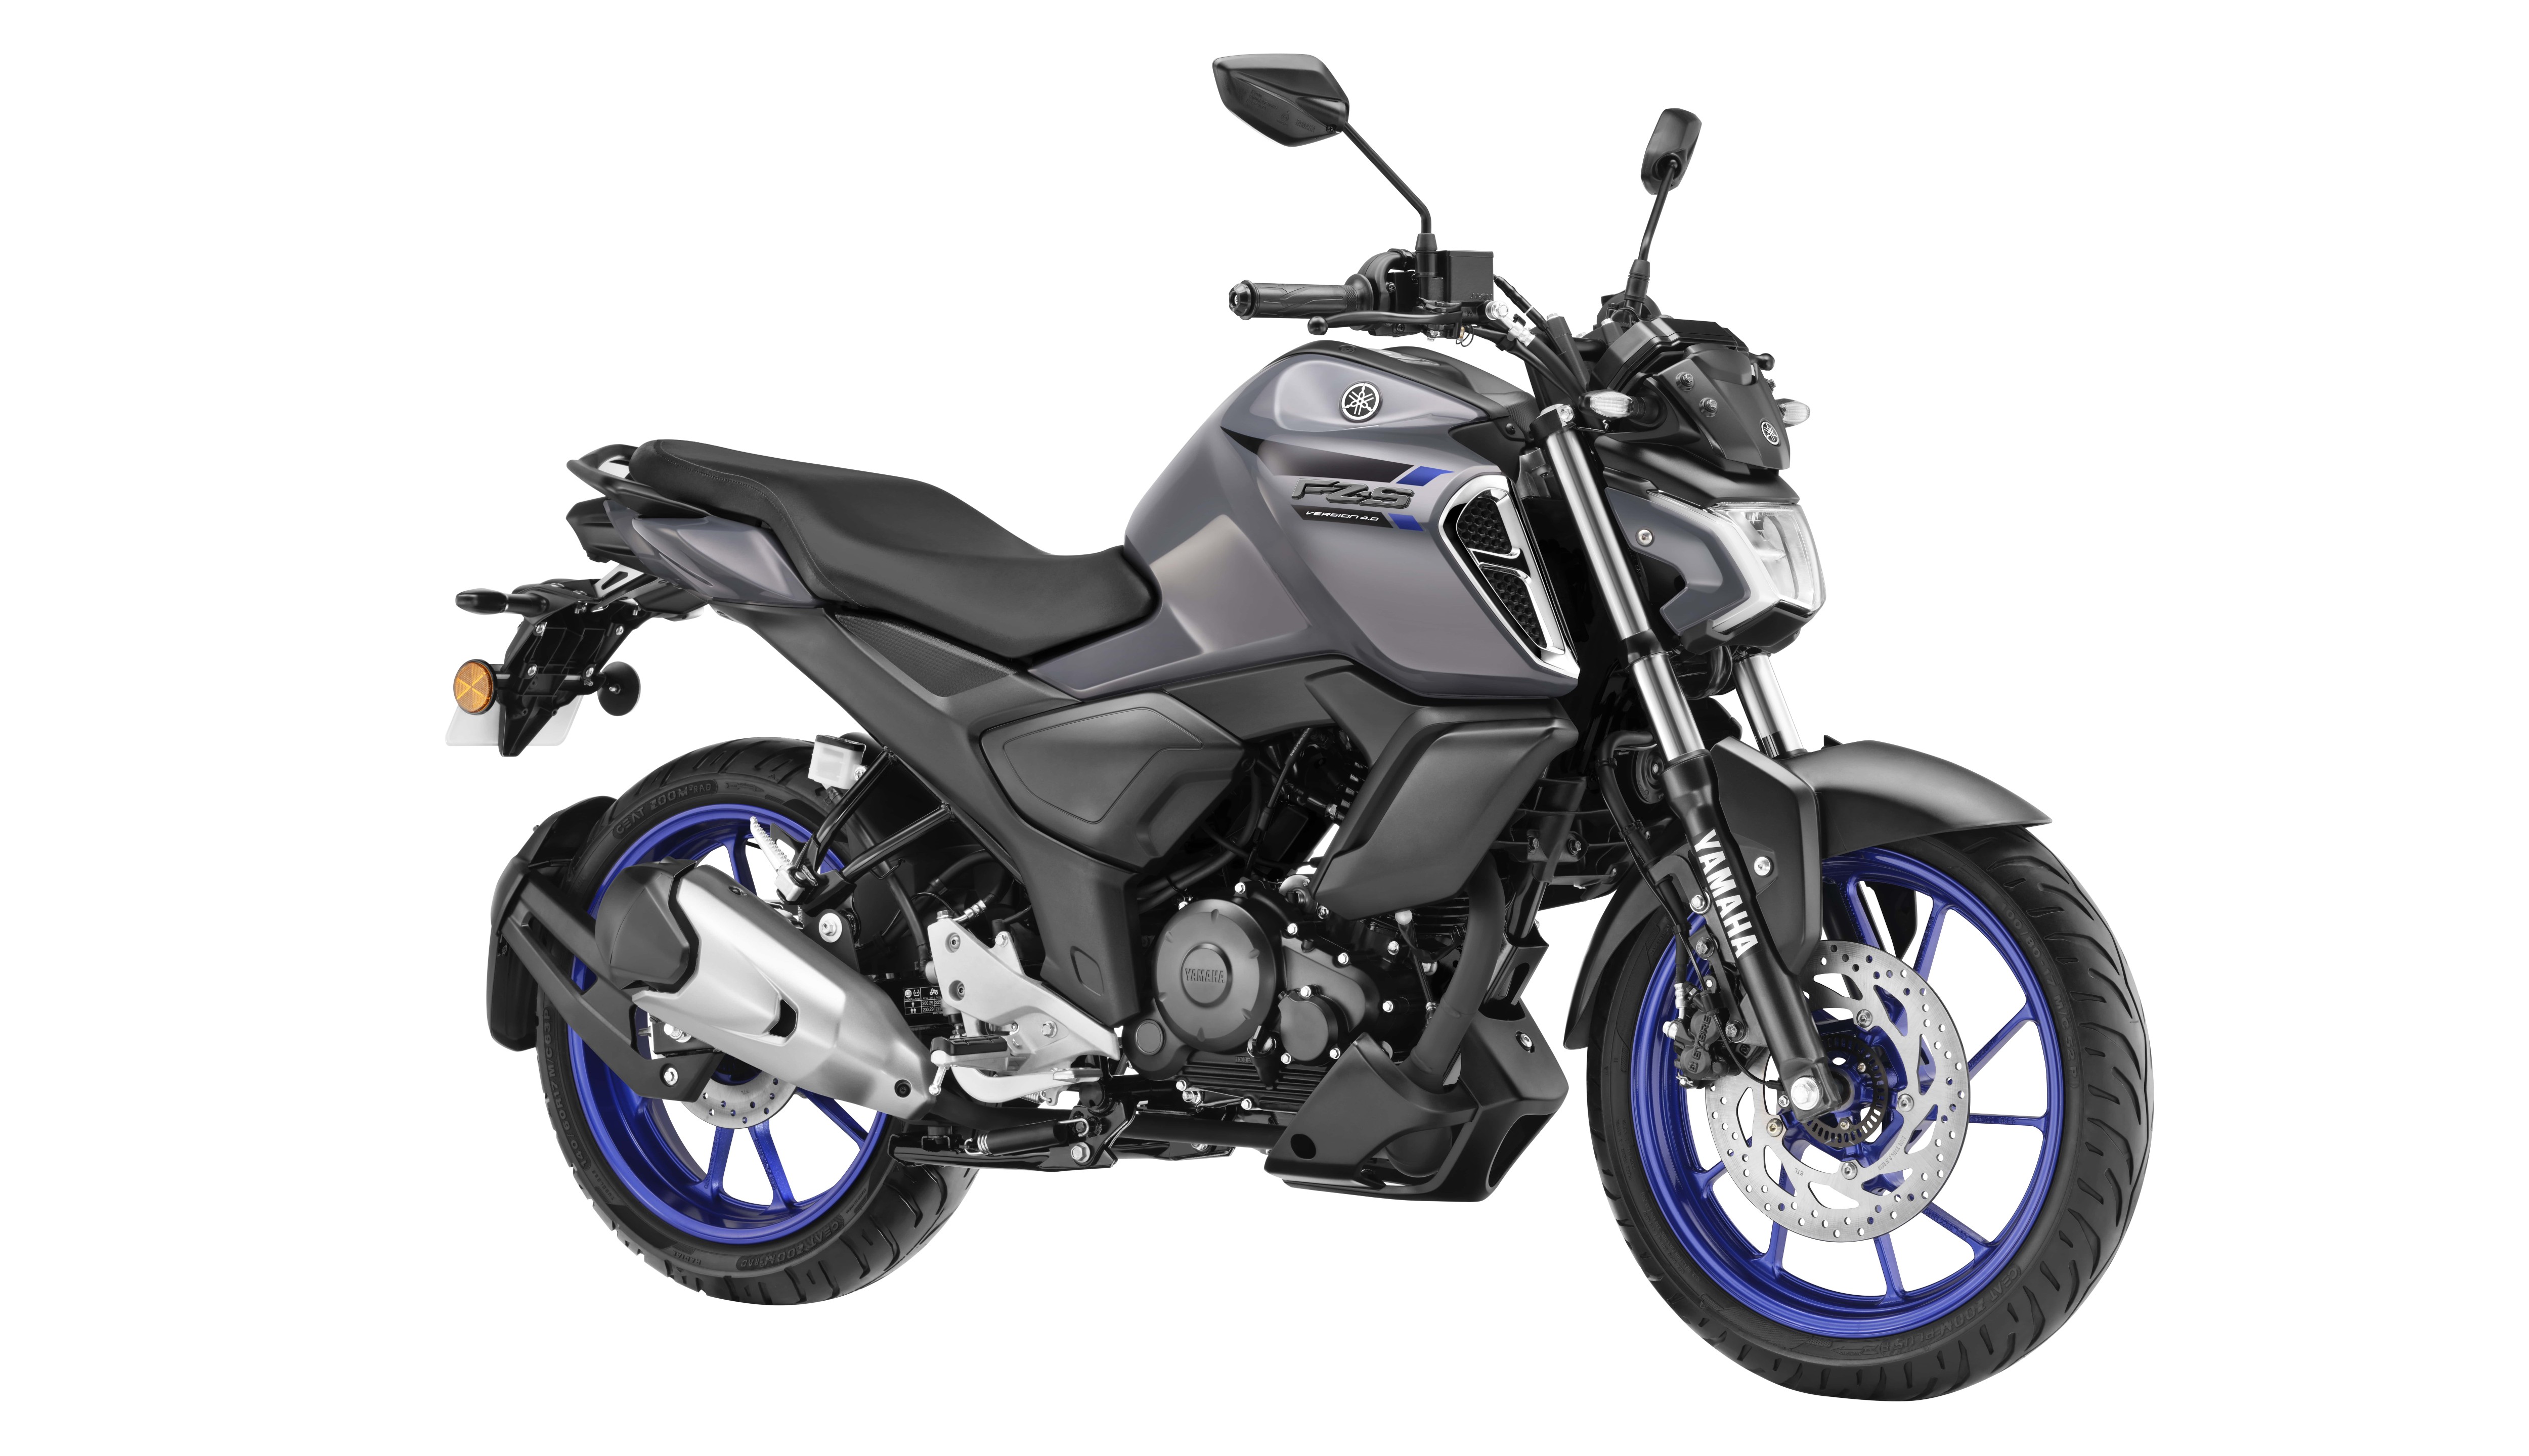 The 2023 FZS FI V4 Deluxe retains the same design and mechanicals. LCD console is new, get bluetooth connection via Y-connect app